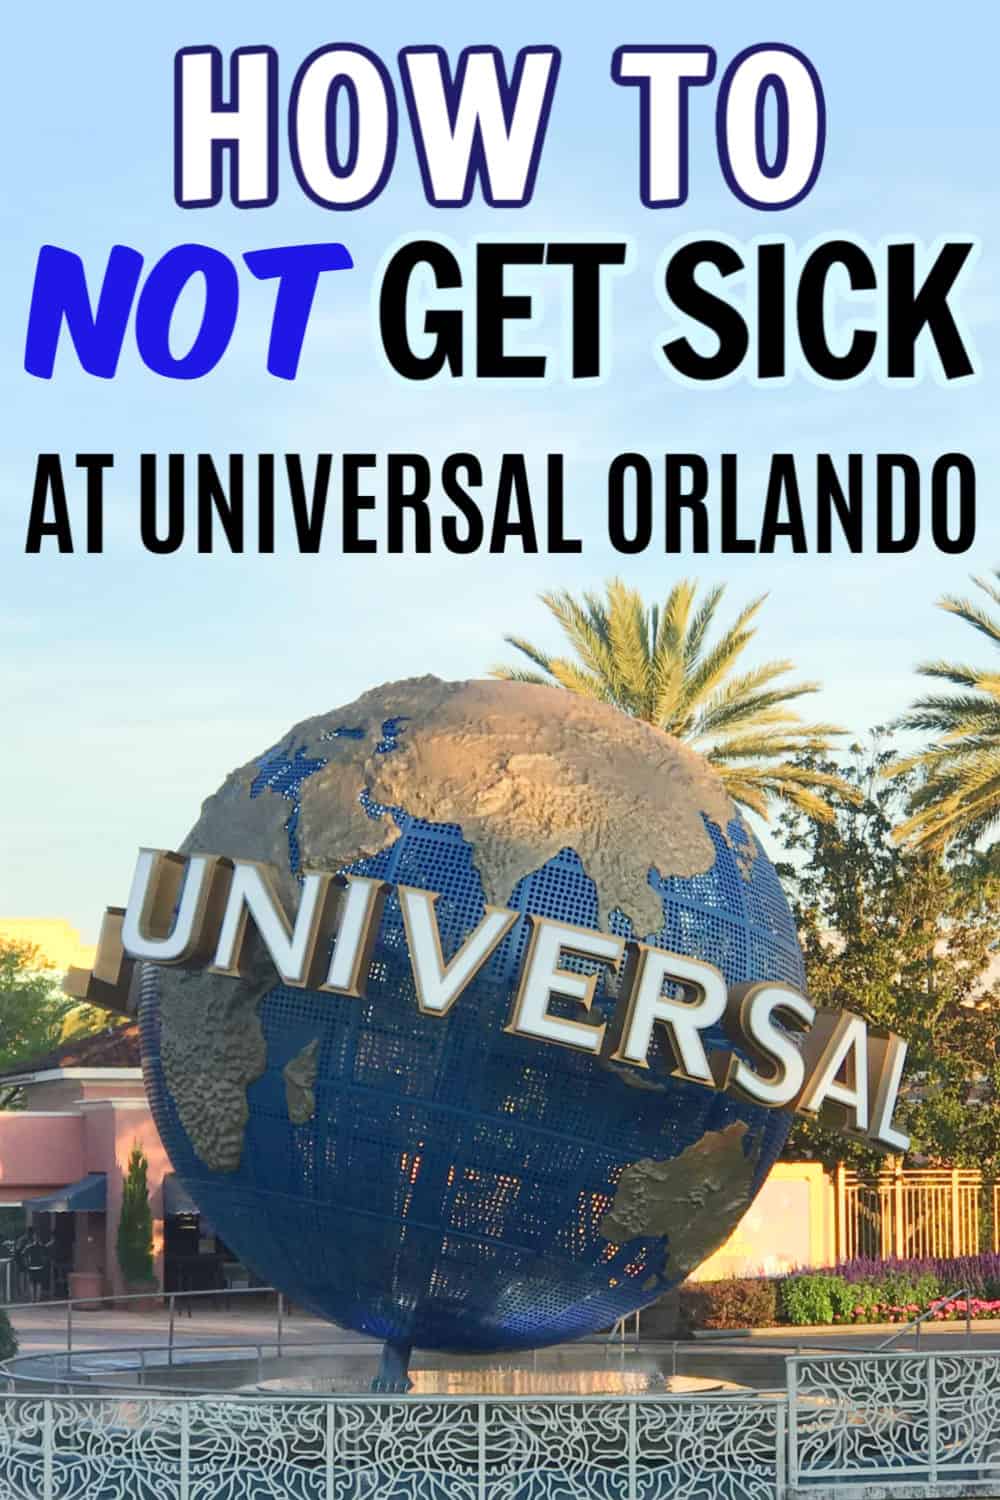 Headed to Universal Orlando Resort and looking for ways to stay healthy? From items to pack in your park bag to resort room ideas, here's how to NOT get sick at Universal Orlando! #UniversalOrlando #UOR #travel #traveltips #Floridavacations #familytravel